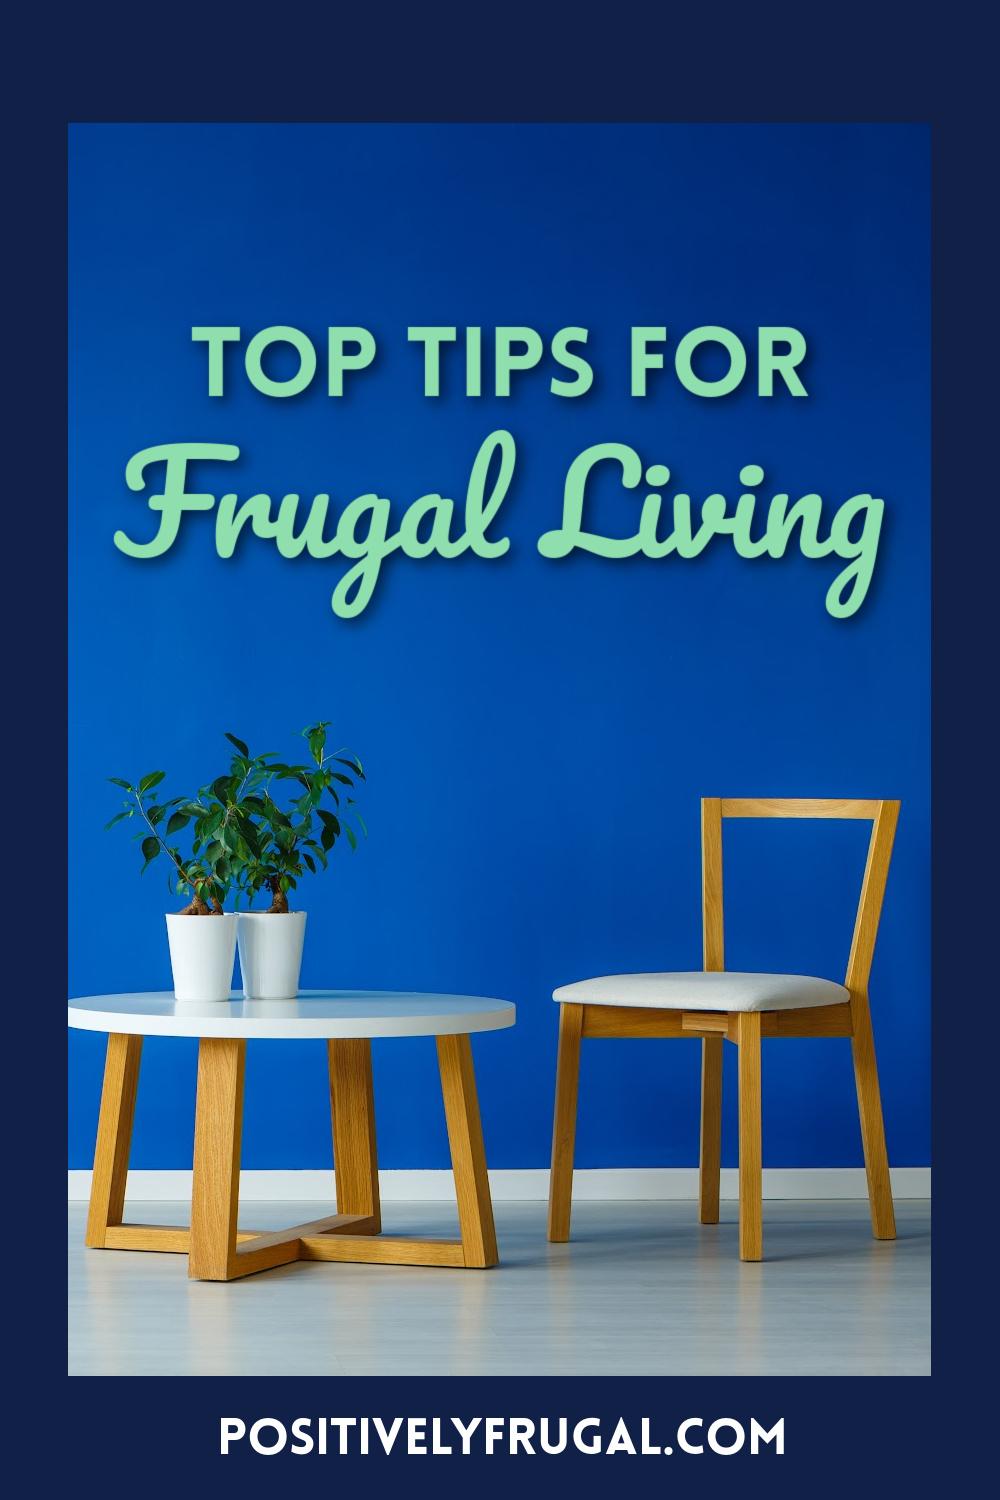 Top Tips for Frugal Living by PositivelyFrugal.com